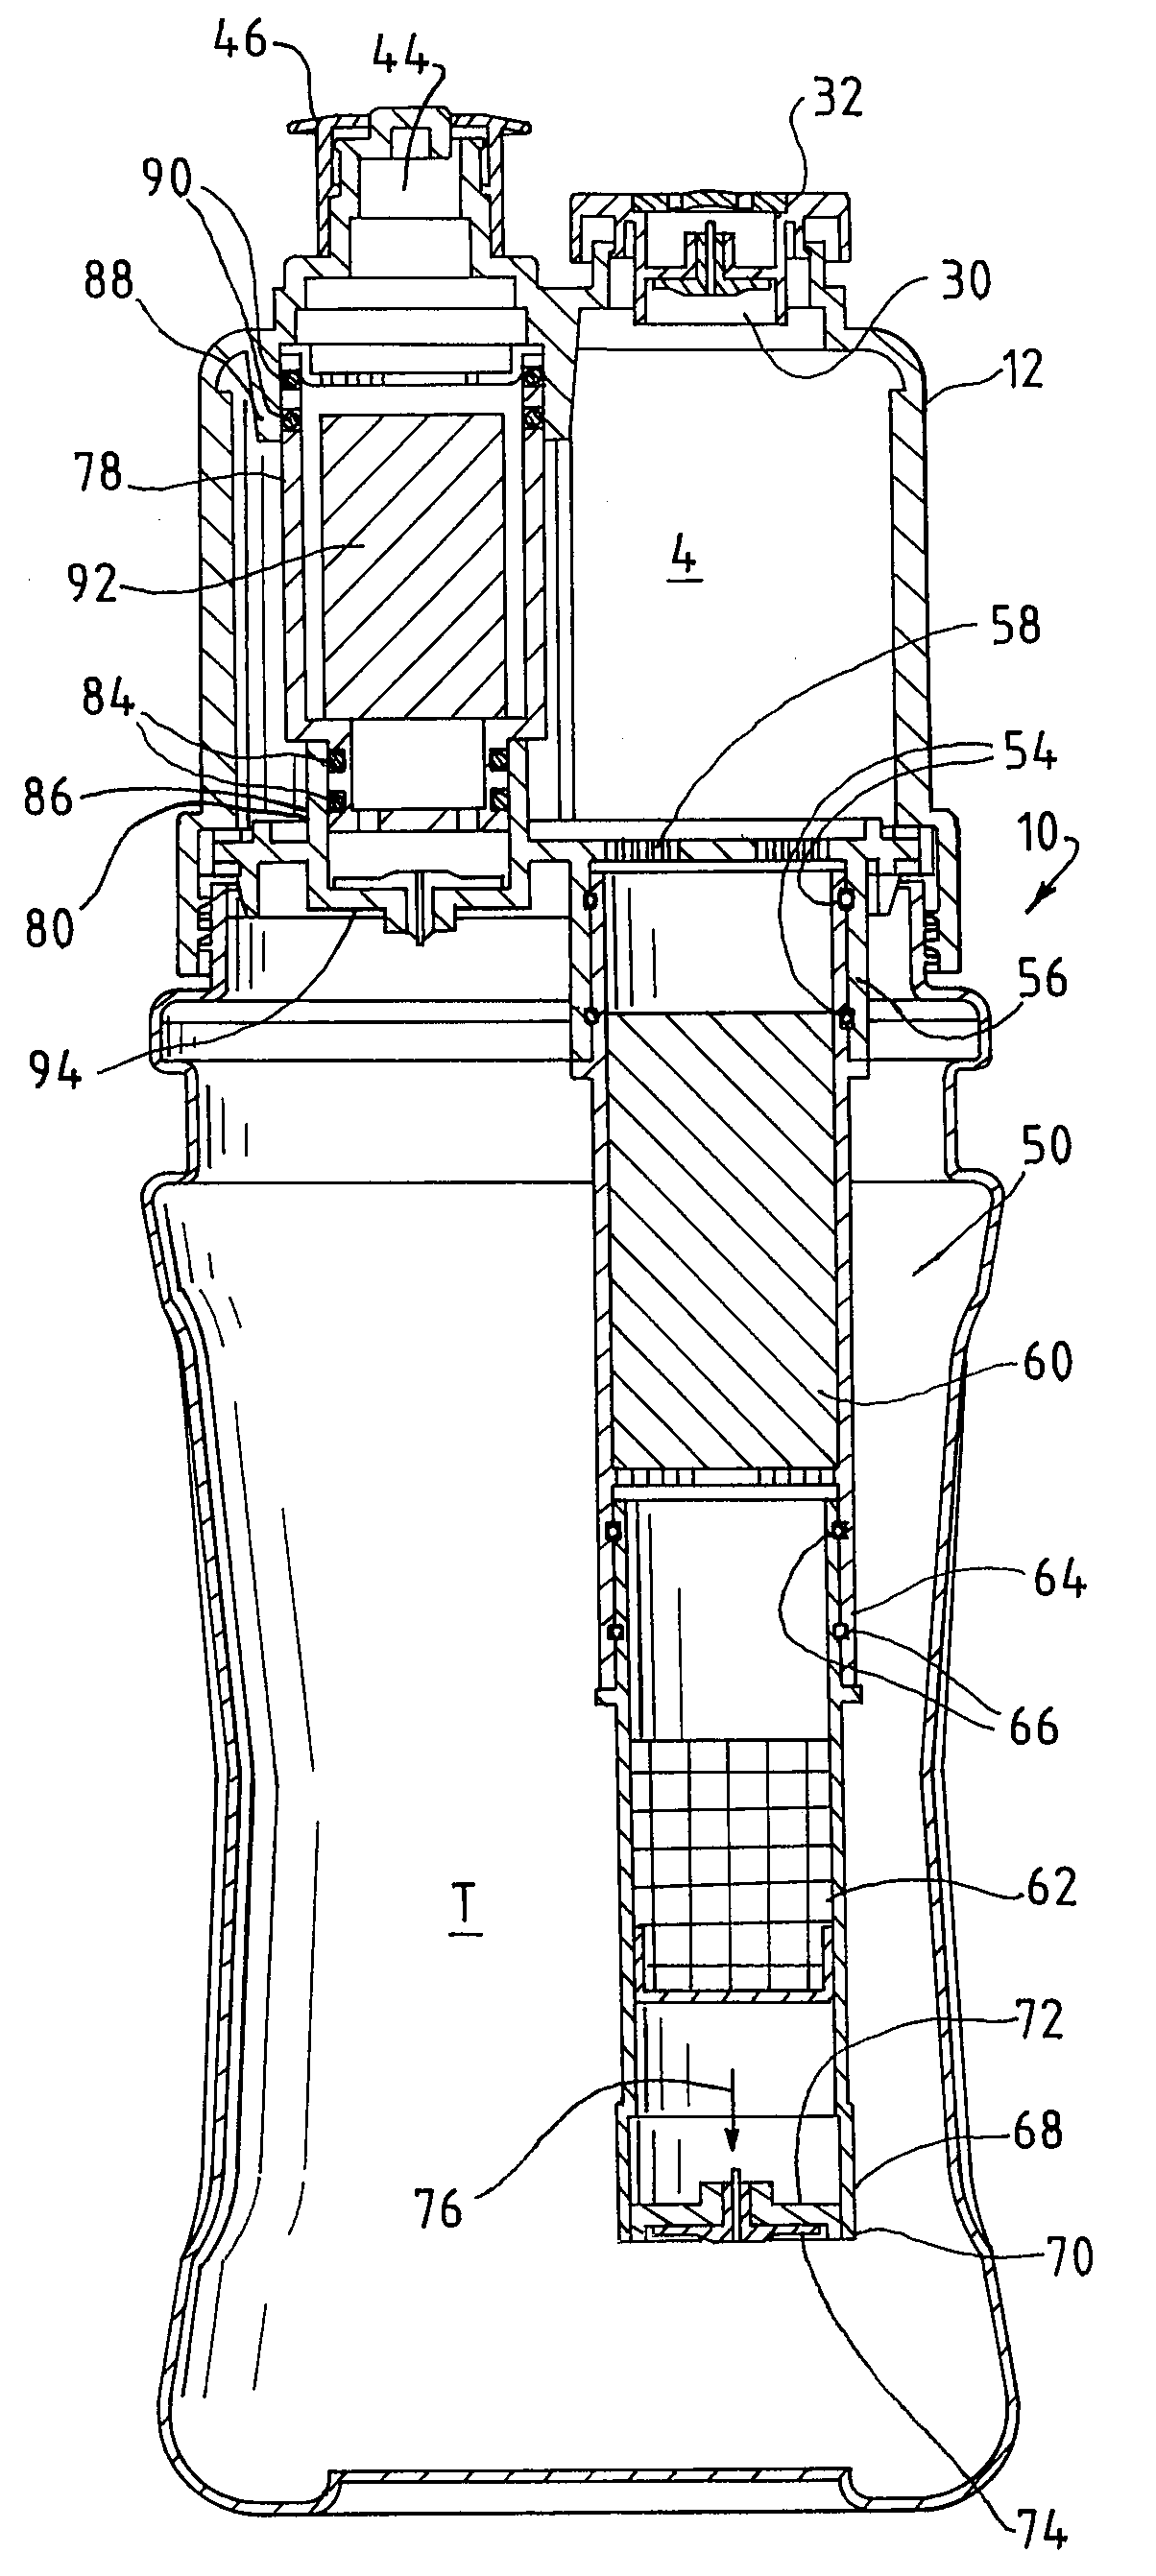 Multi-stage water purification device